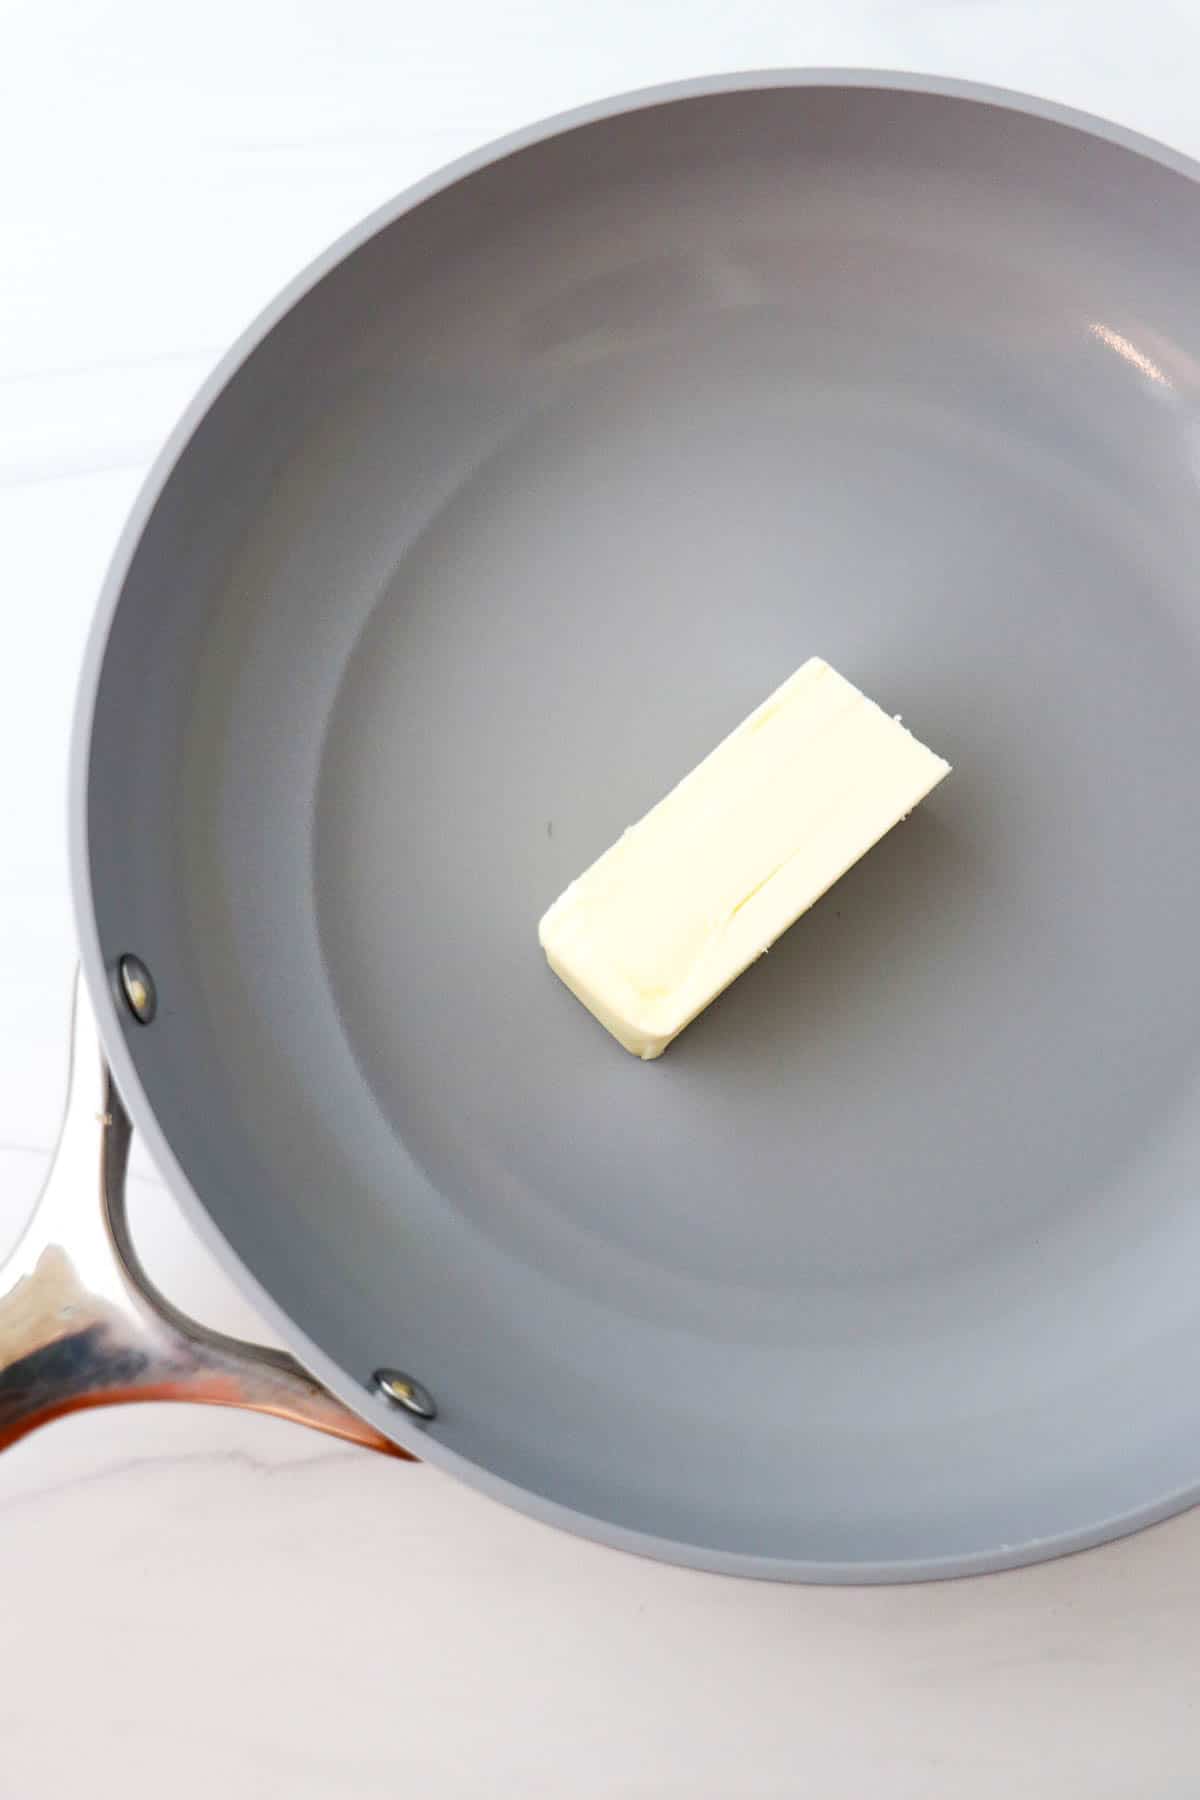 Stick of butter in a gray skillet.